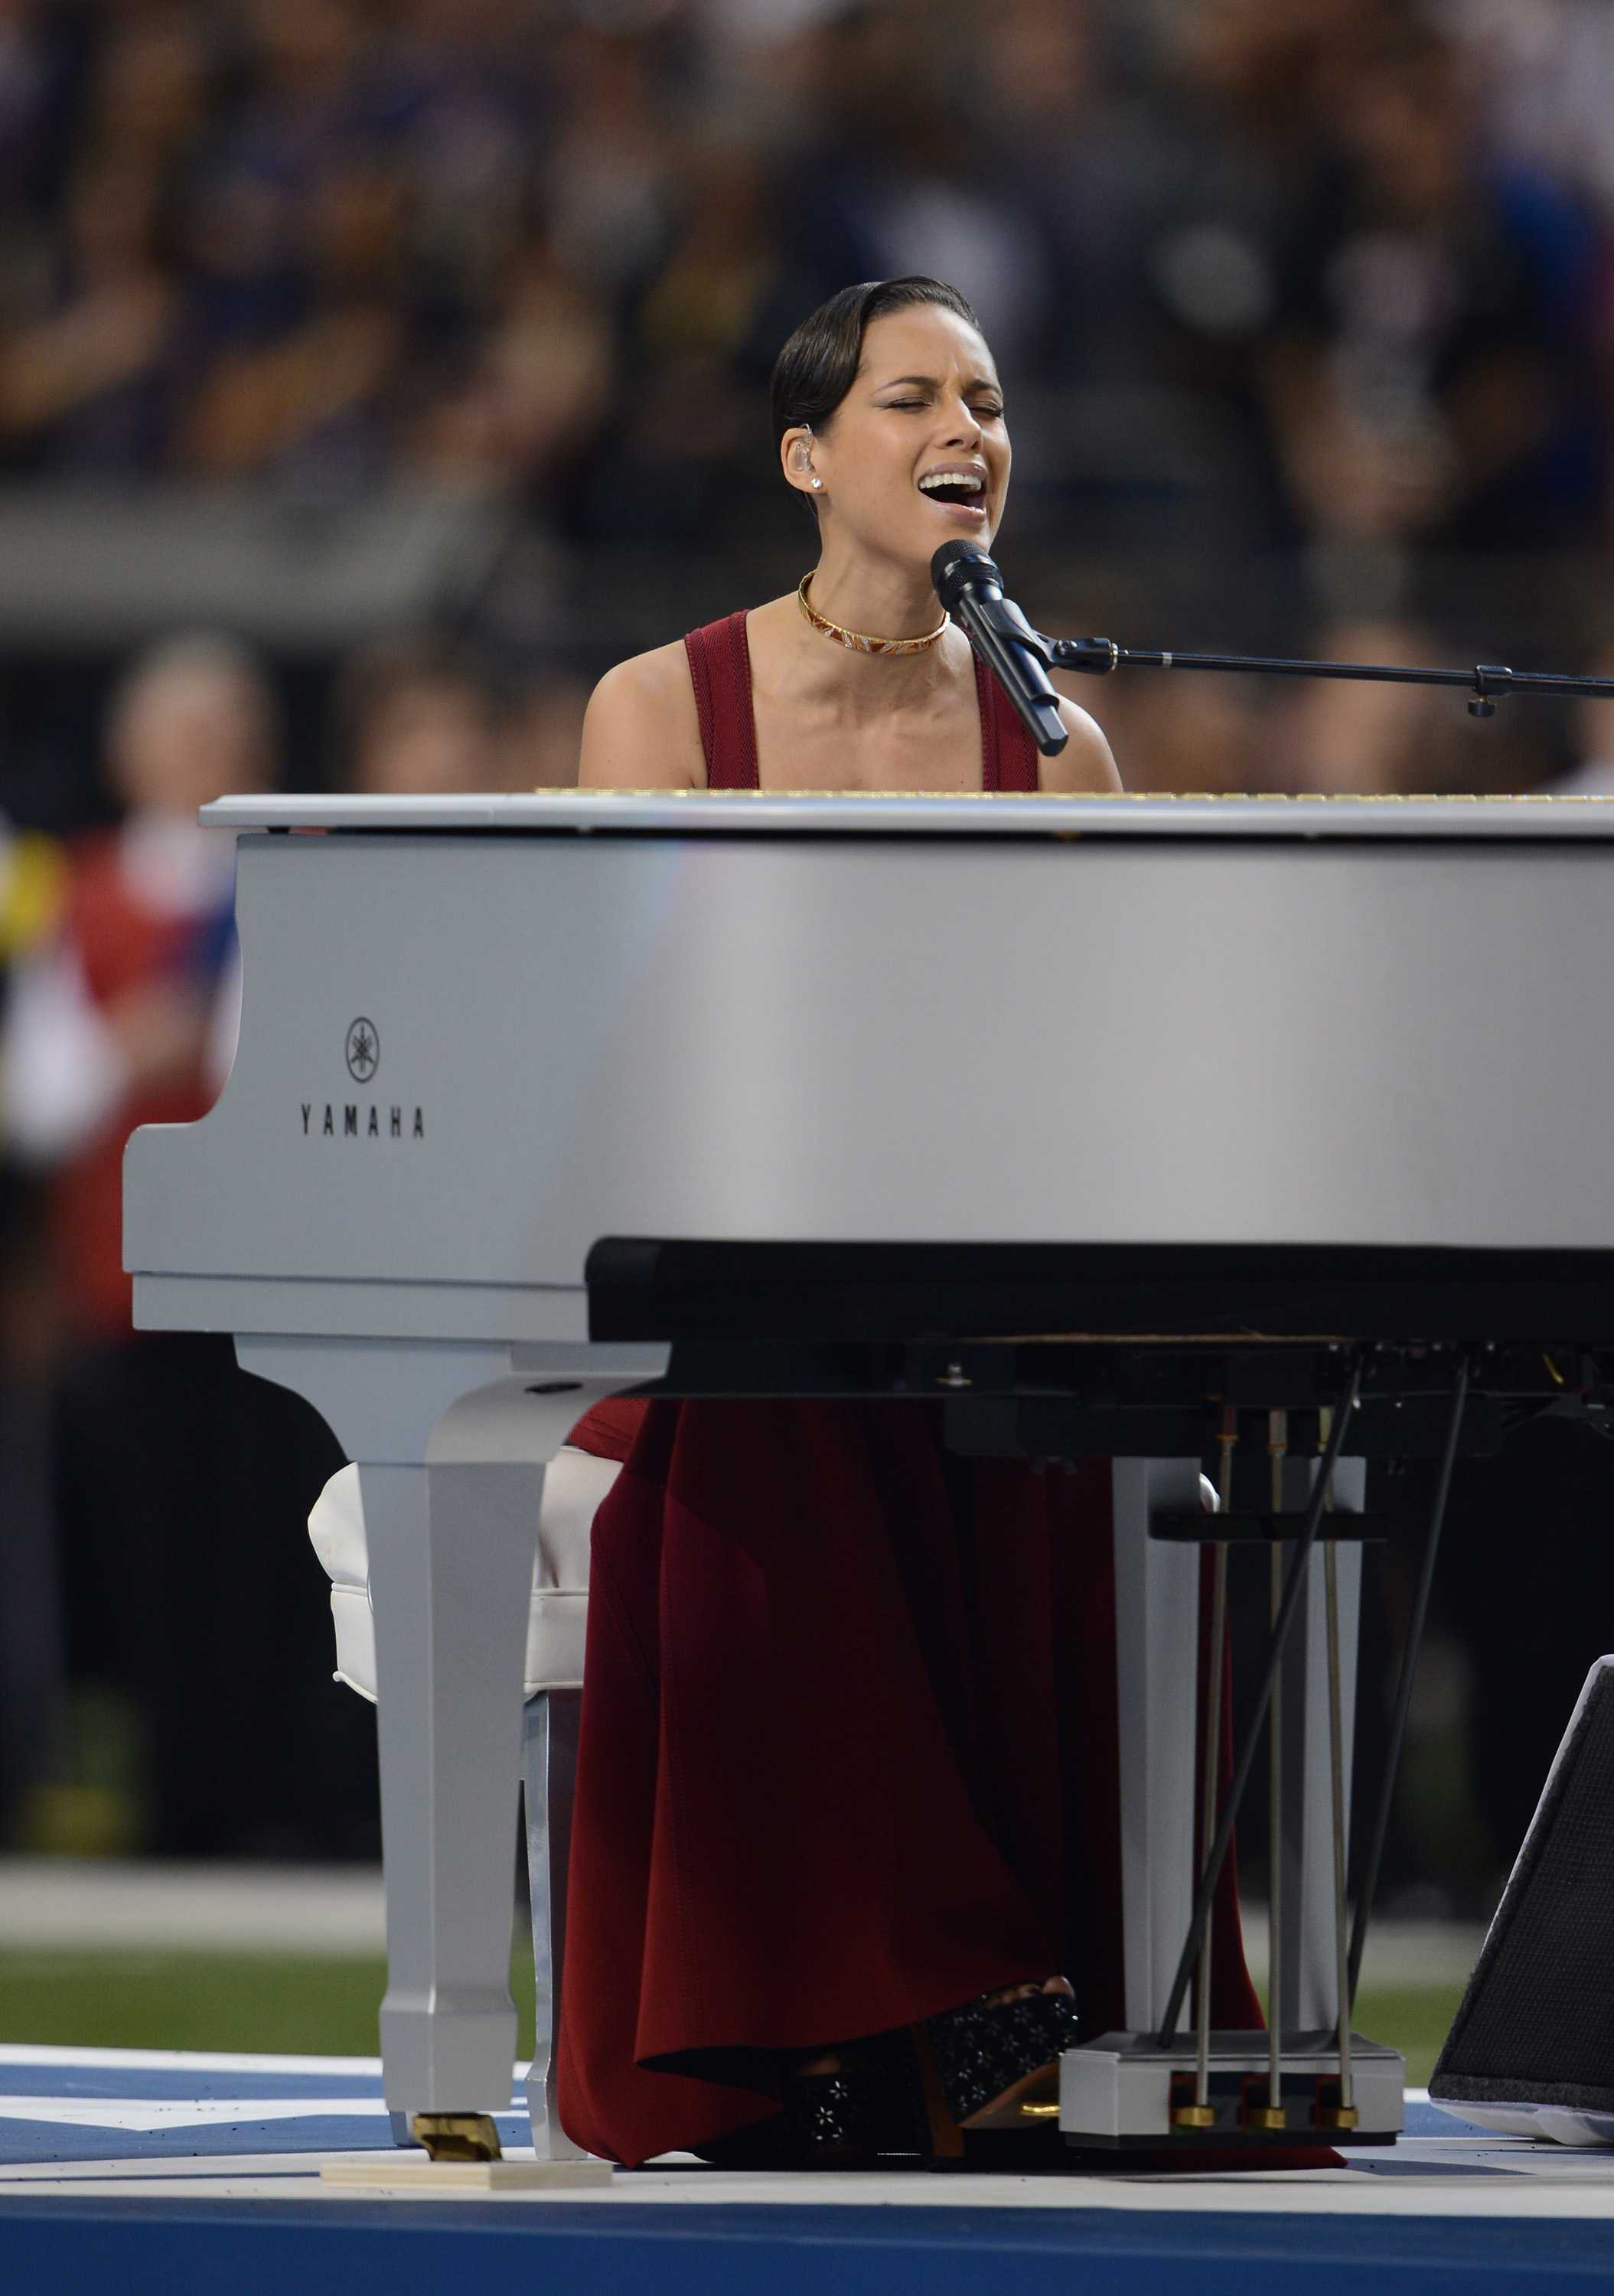 Alicia Keys plays the piano and sings